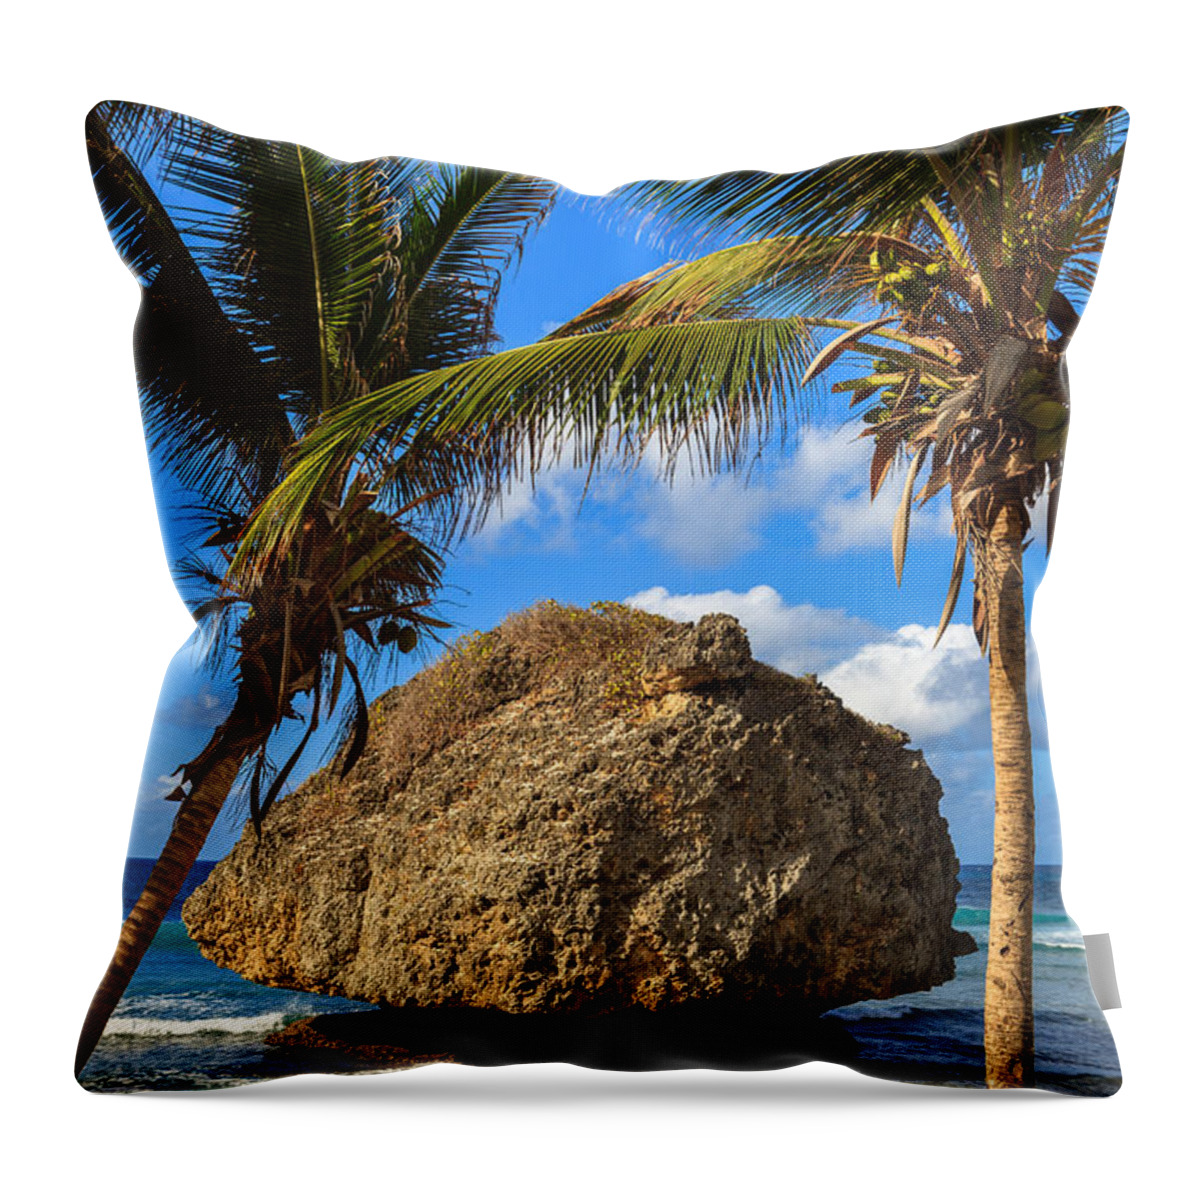 Barbados Throw Pillow featuring the photograph Barbados Beach by Raul Rodriguez